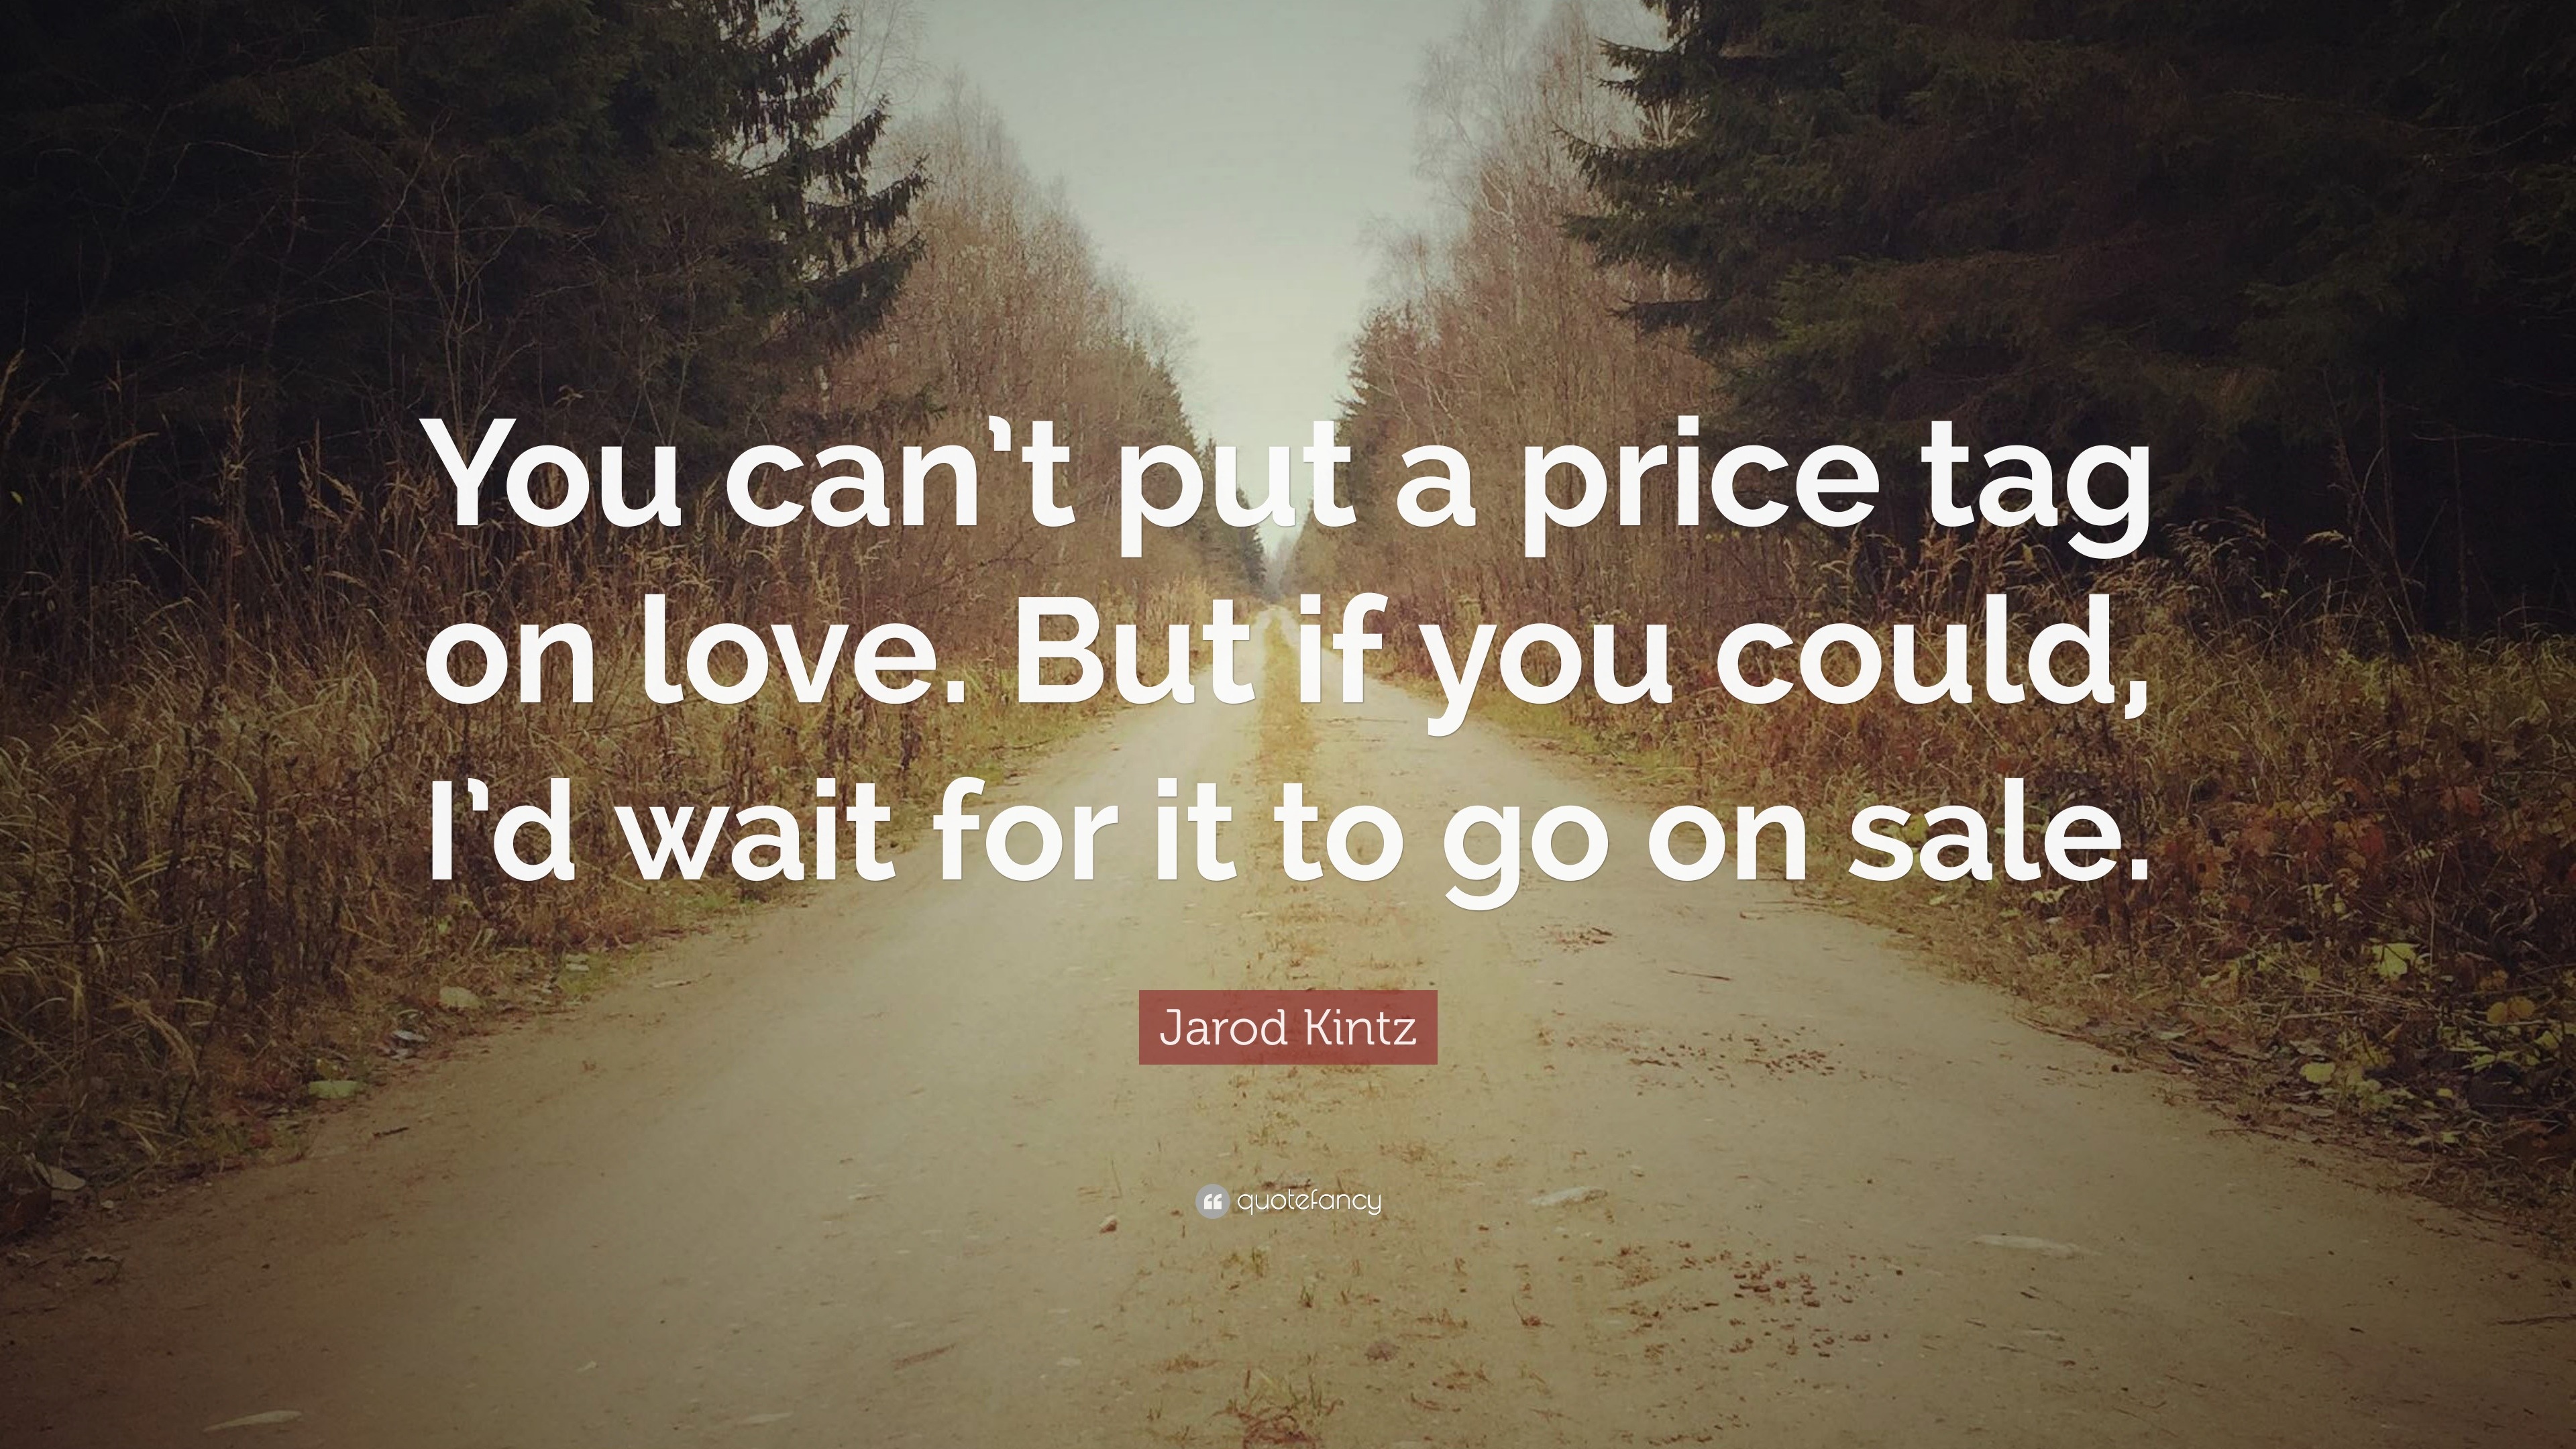 Jarod Kintz Quote “You can t put a price tag on love